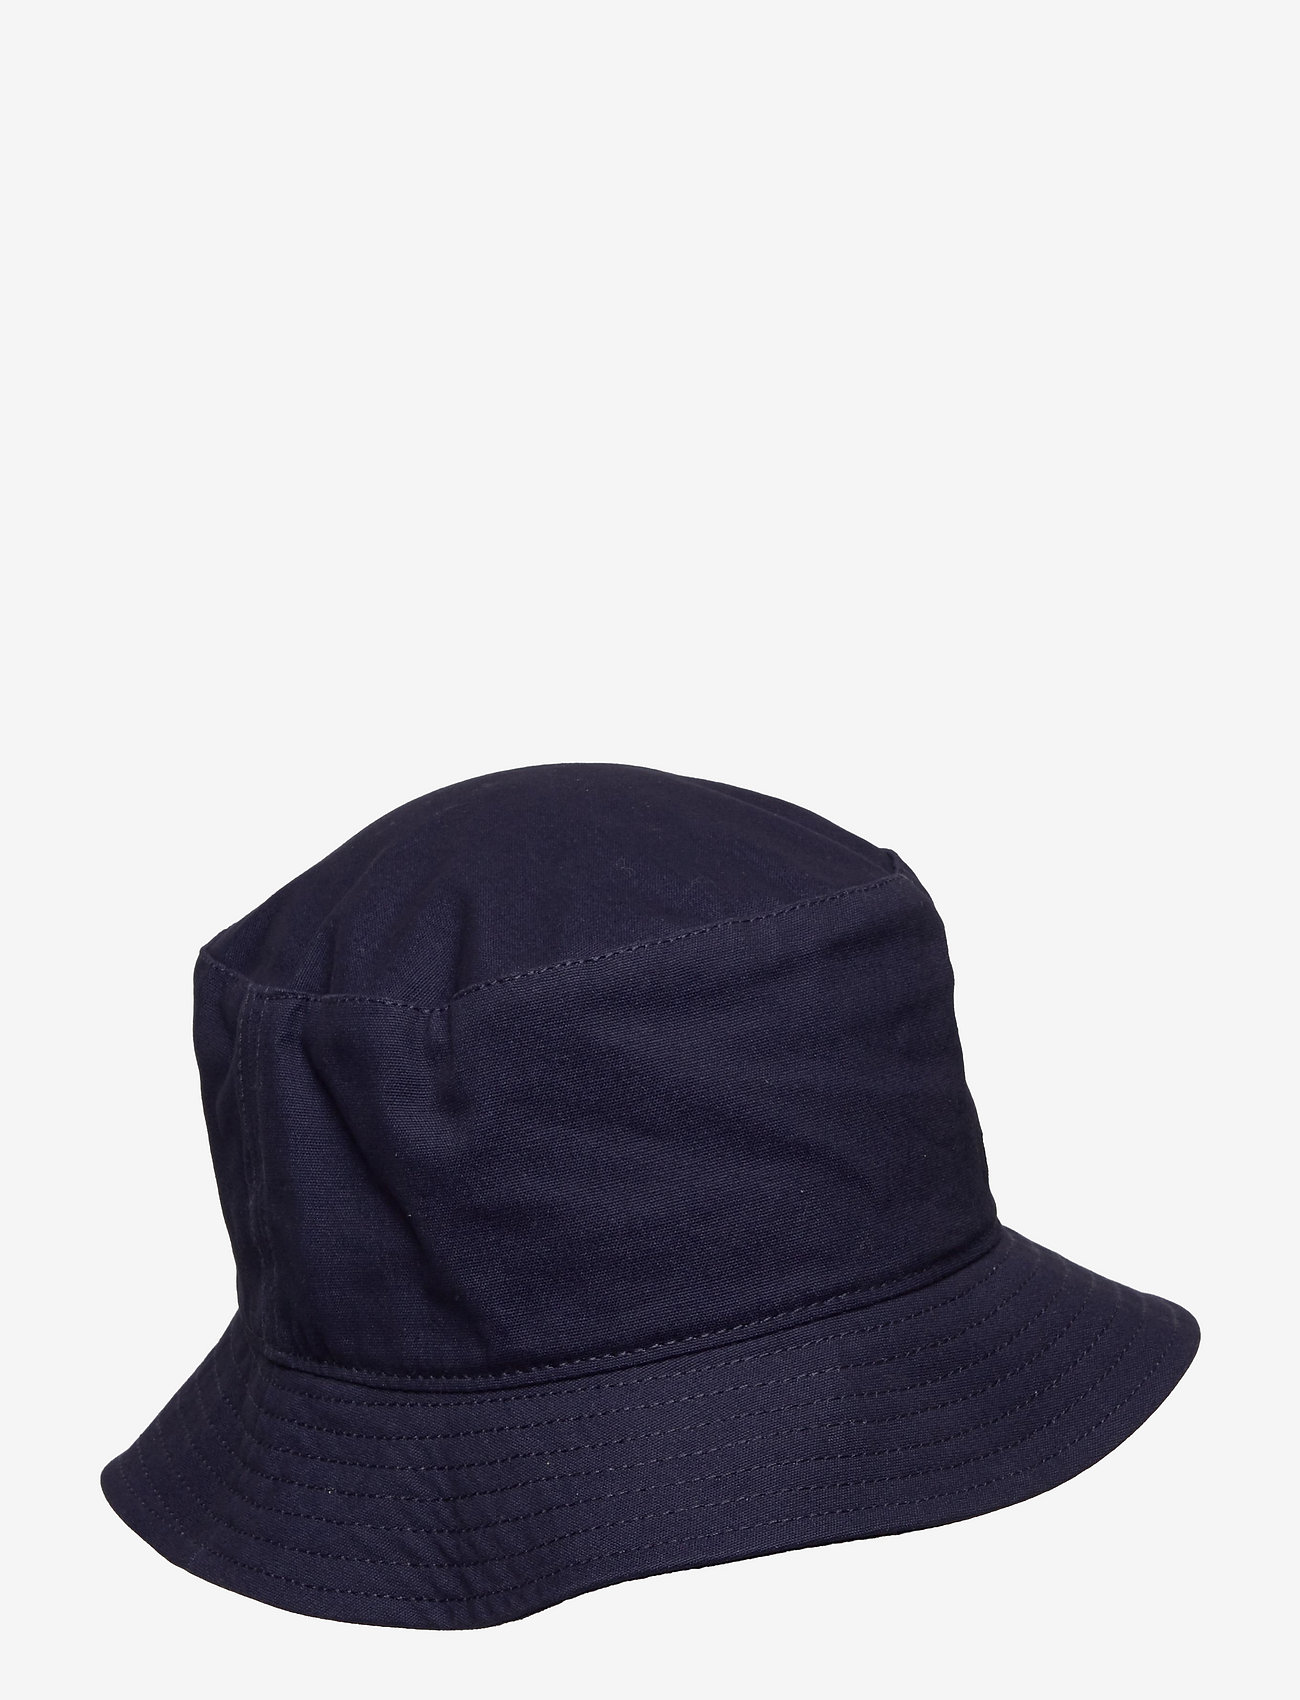 Timberland Peached Cotton Canvas Bucket Hat - Hats | Boozt.com